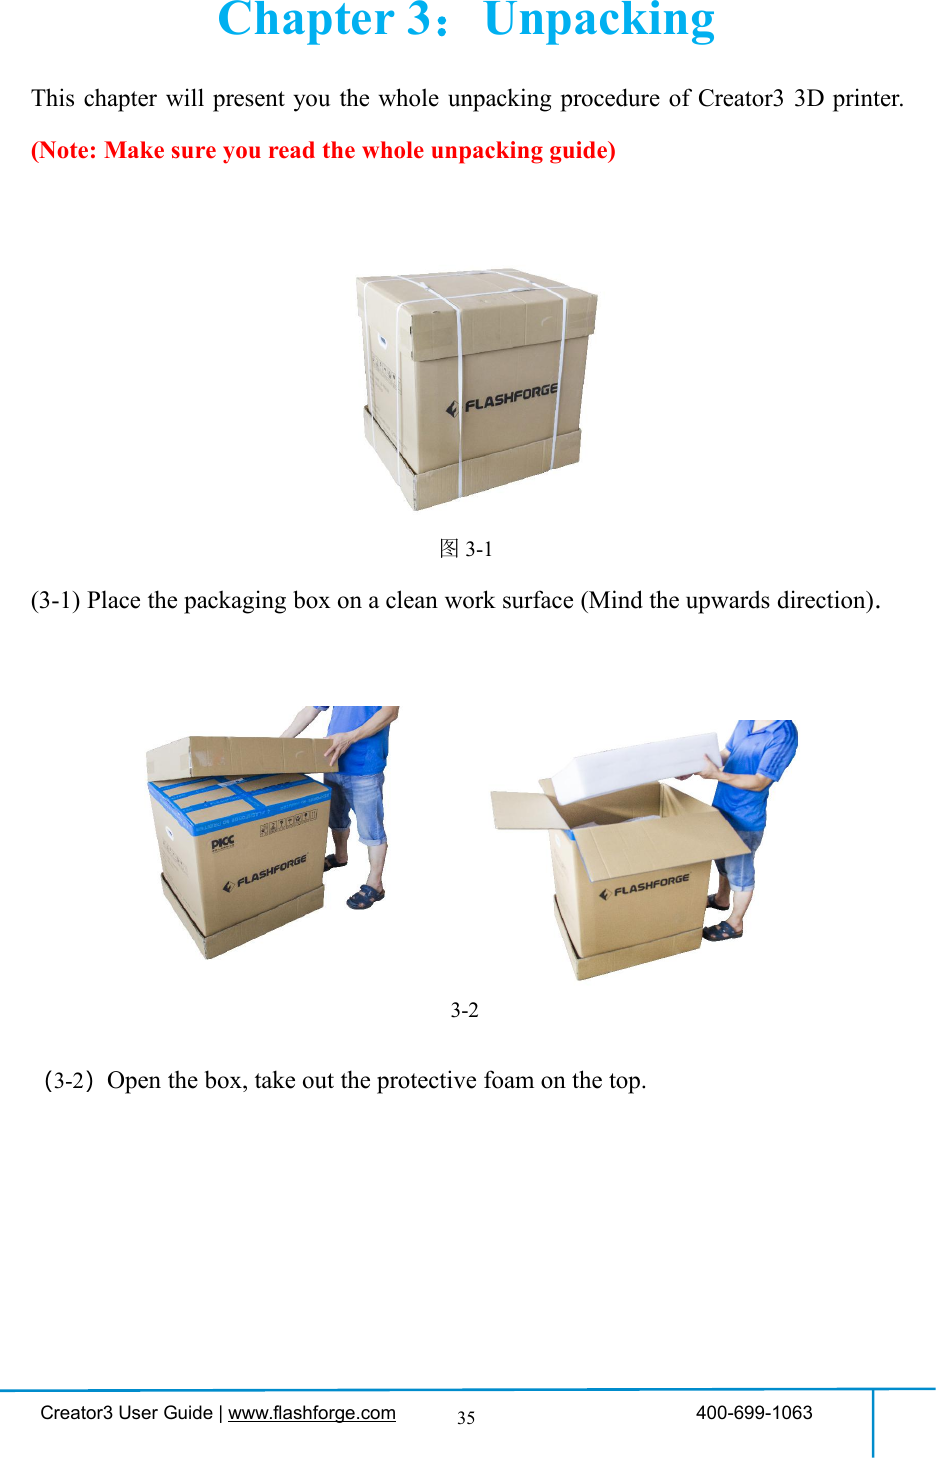 Creator3 User Guide | www.flashforge.com 400-699-106335Chapter 3：UnpackingThis chapter will present you the whole unpacking procedure of Creator3 3D printer.(Note: Make sure you read the whole unpacking guide)图3-1(3-1) Place the packaging box on a clean work surface (Mind the upwards direction).（3-2）Open the box, take out the protective foam on the top.3-2